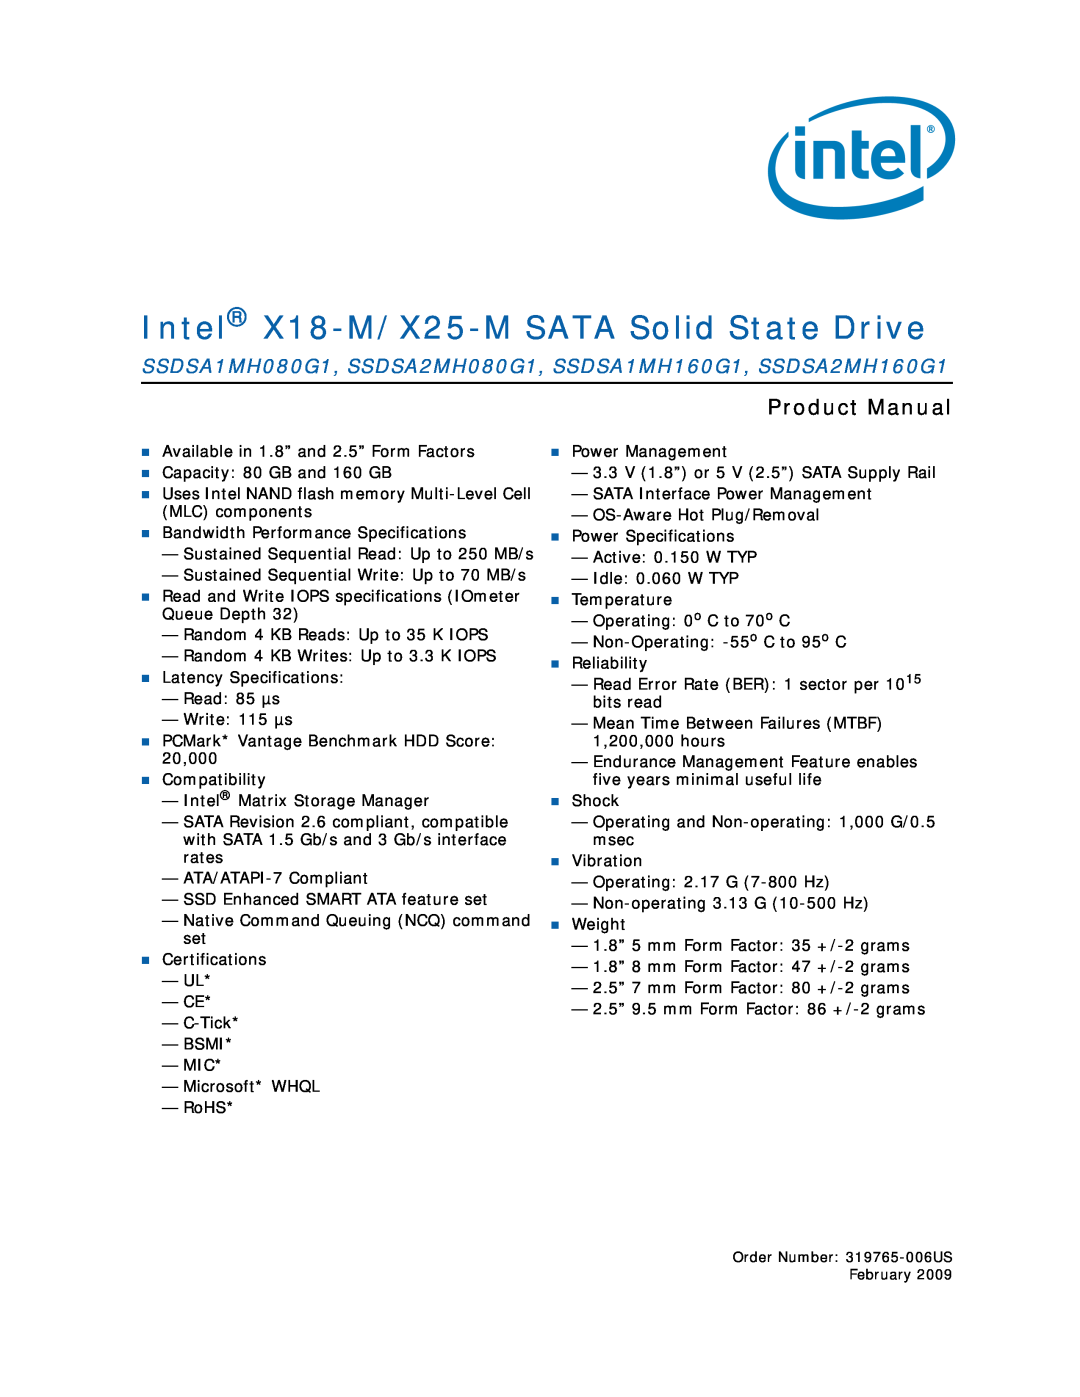 Intel specifications Intel X18-M/X25-MSATA Solid State Drive, Product Manual 